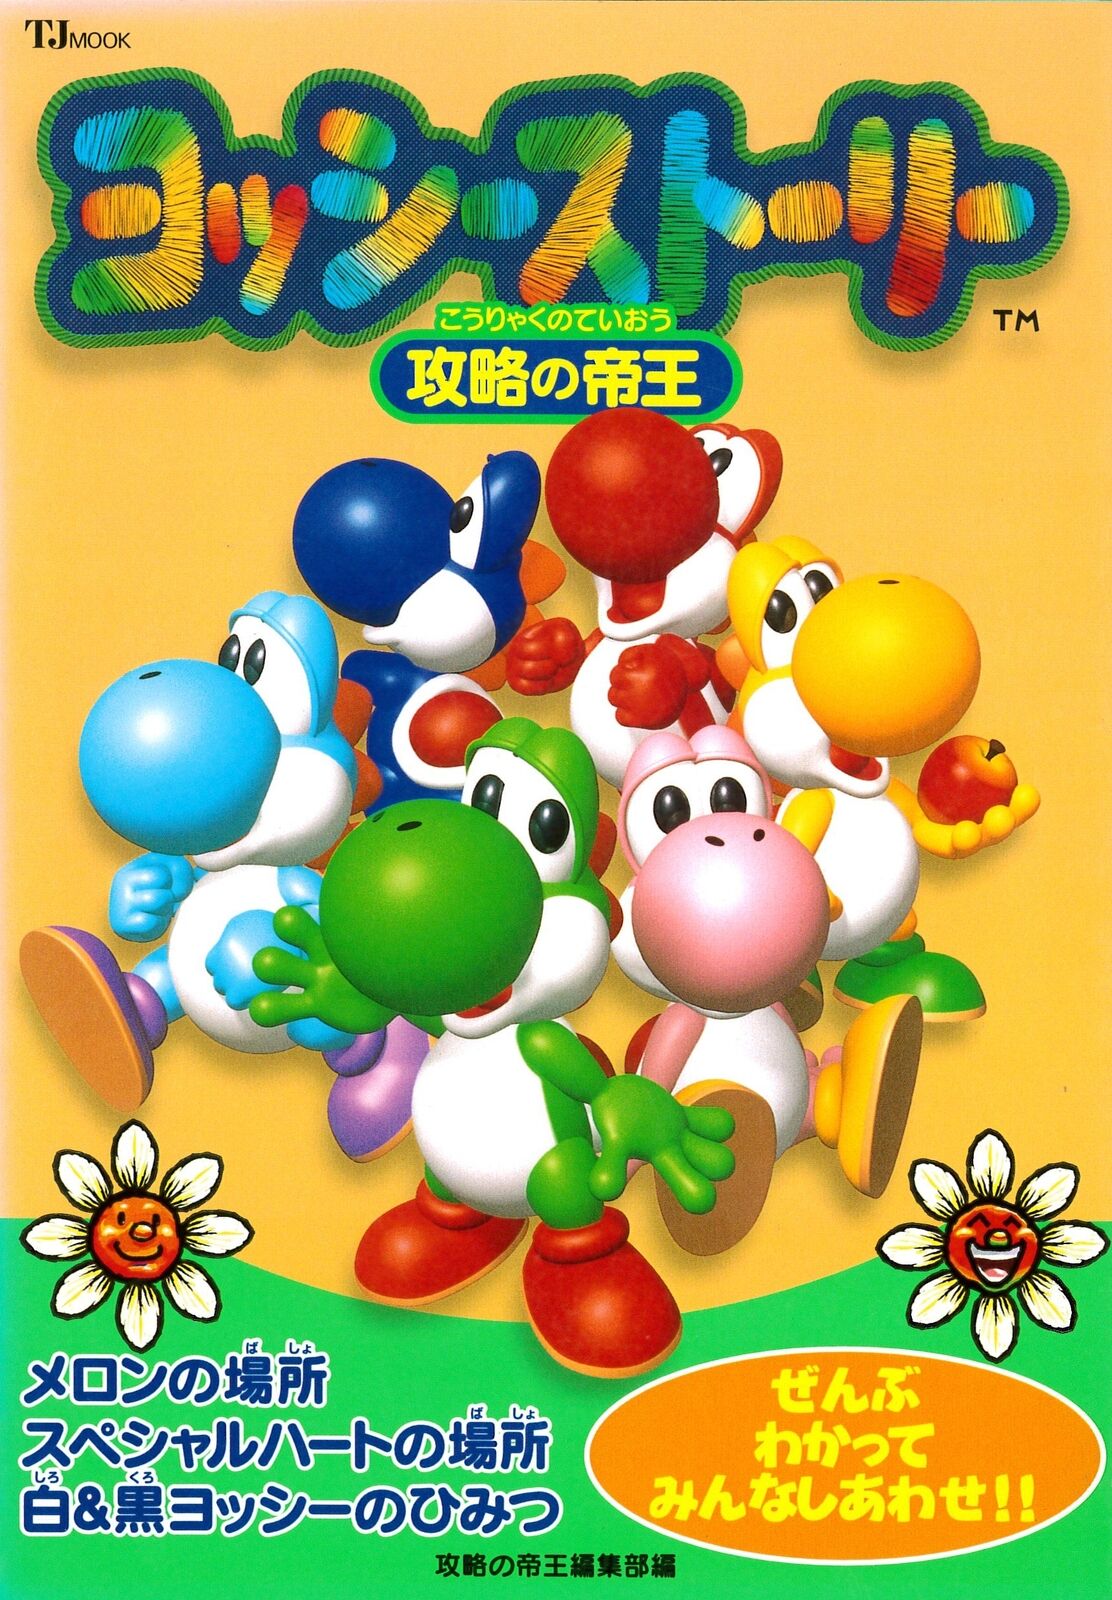 N64 Yoshi story capture Emperor GAME book